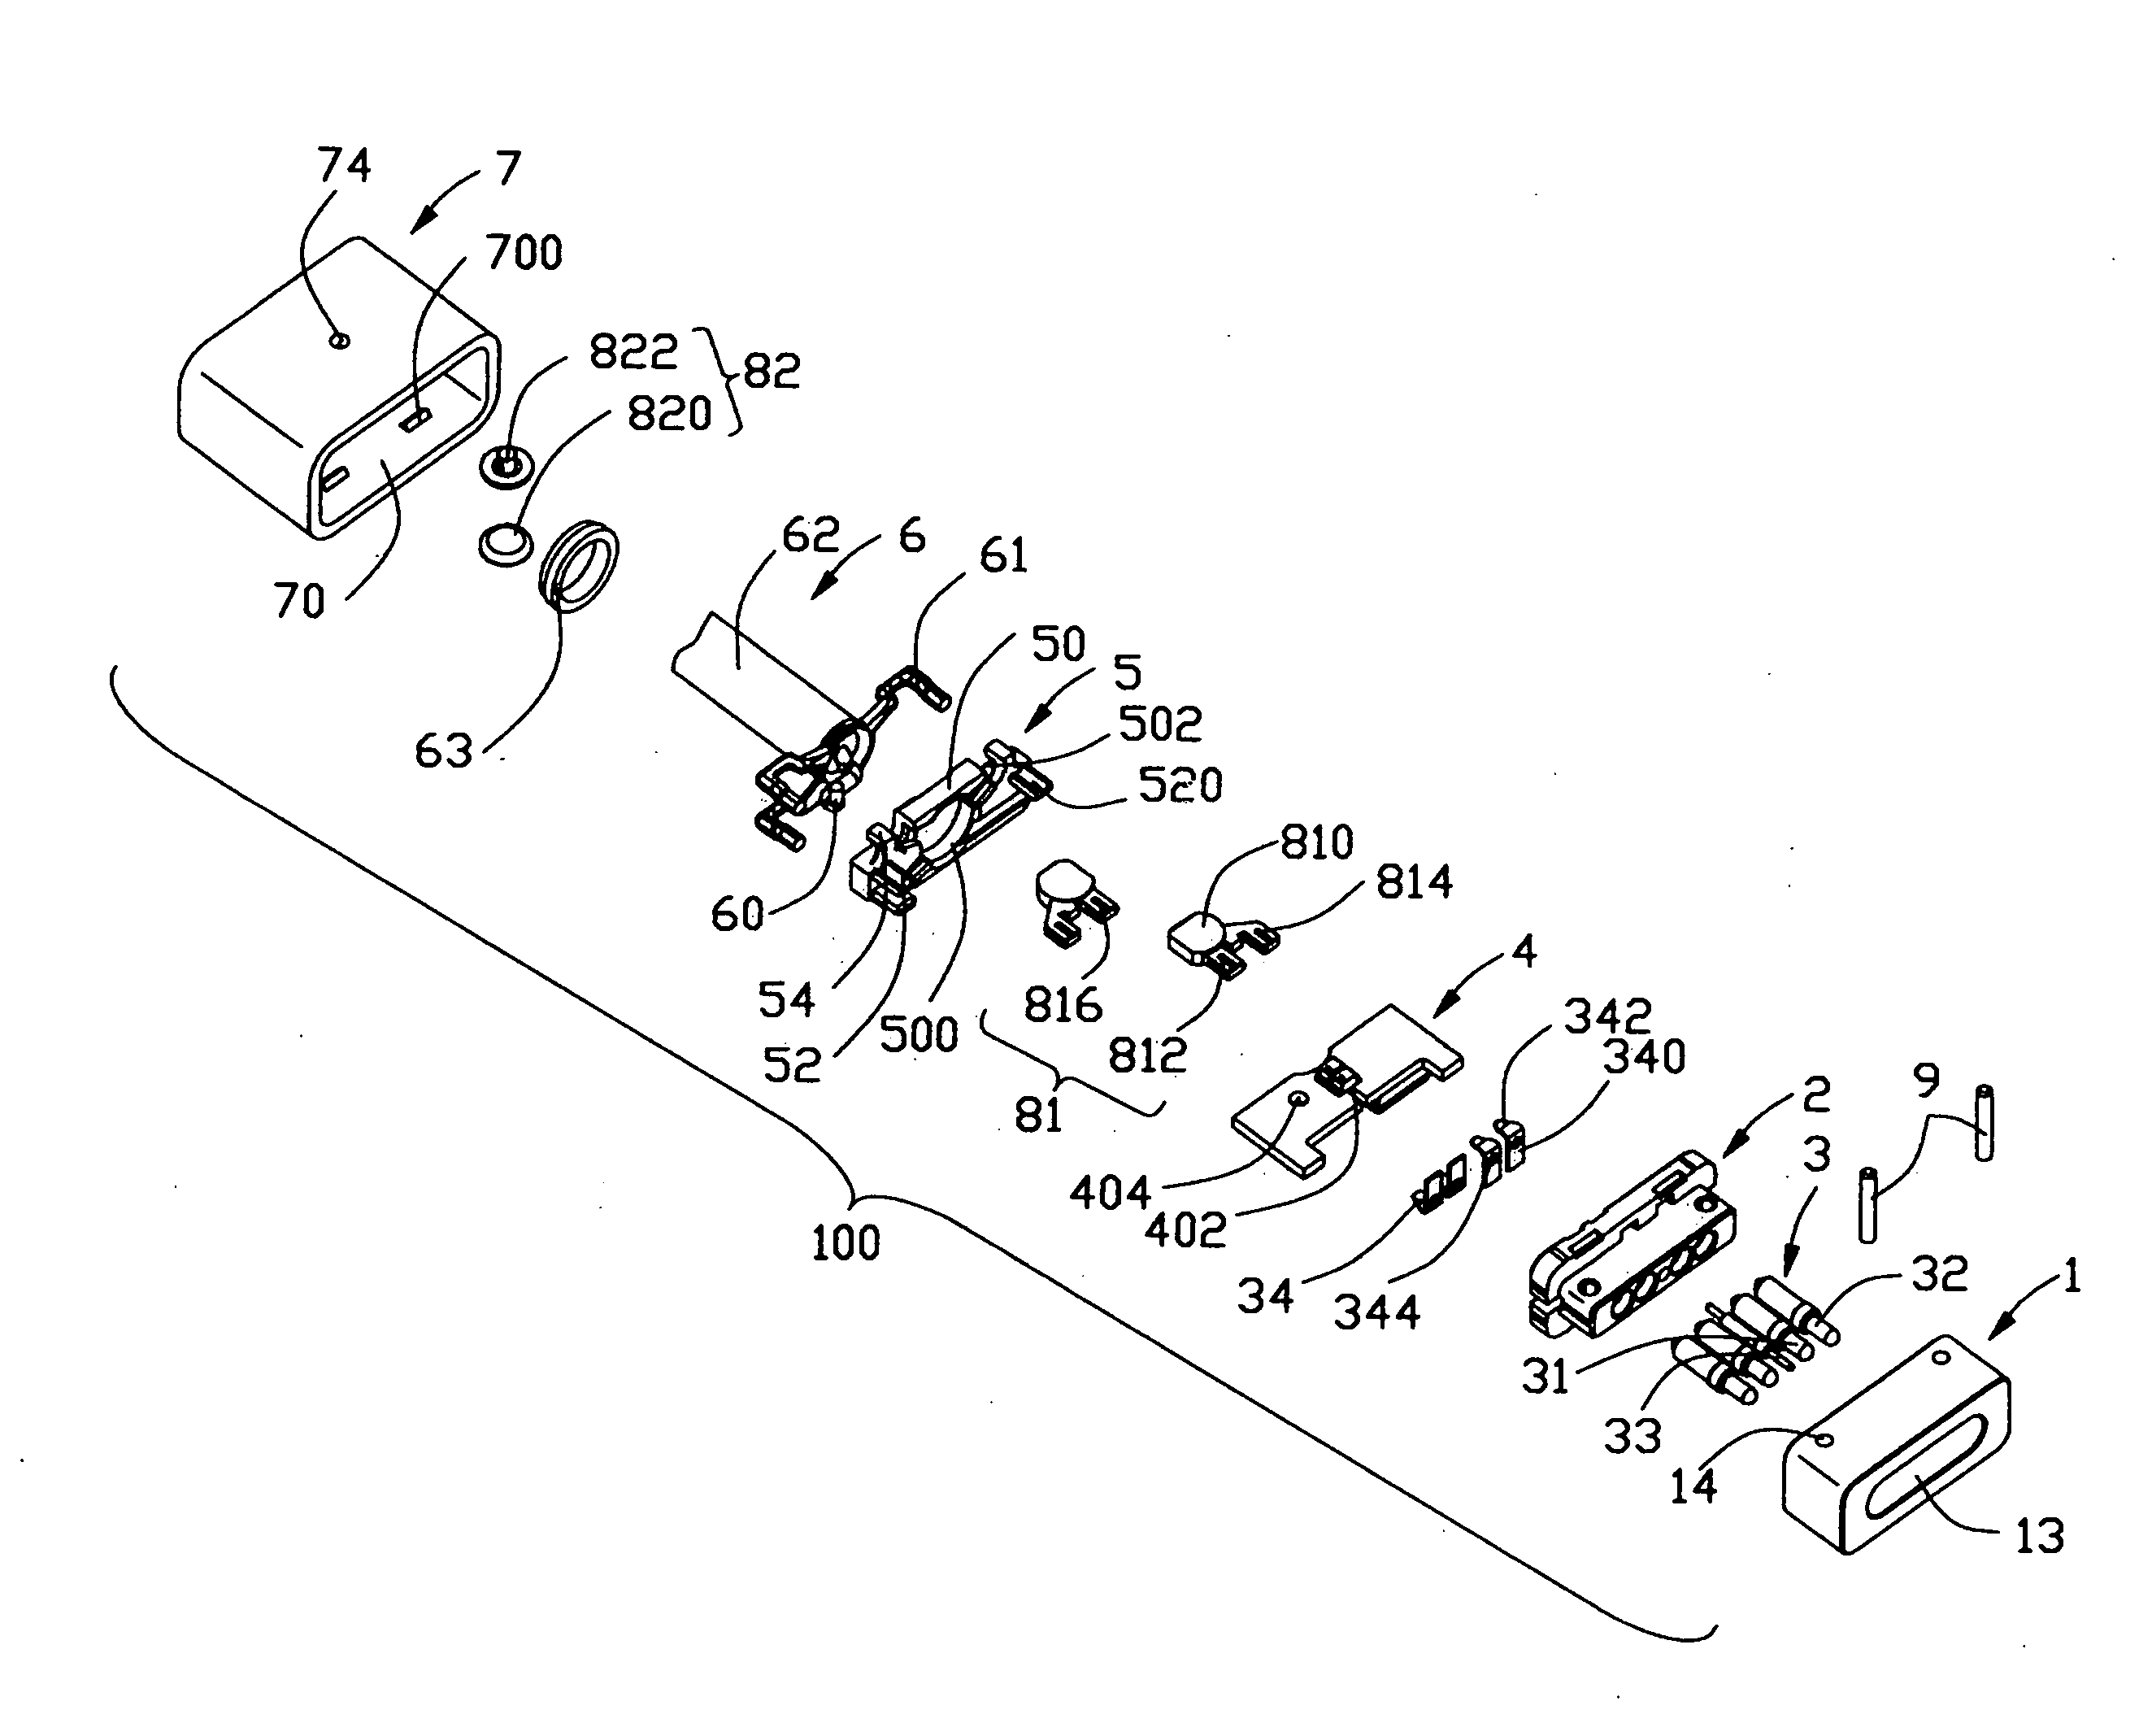 Connector assembly with strain relief member